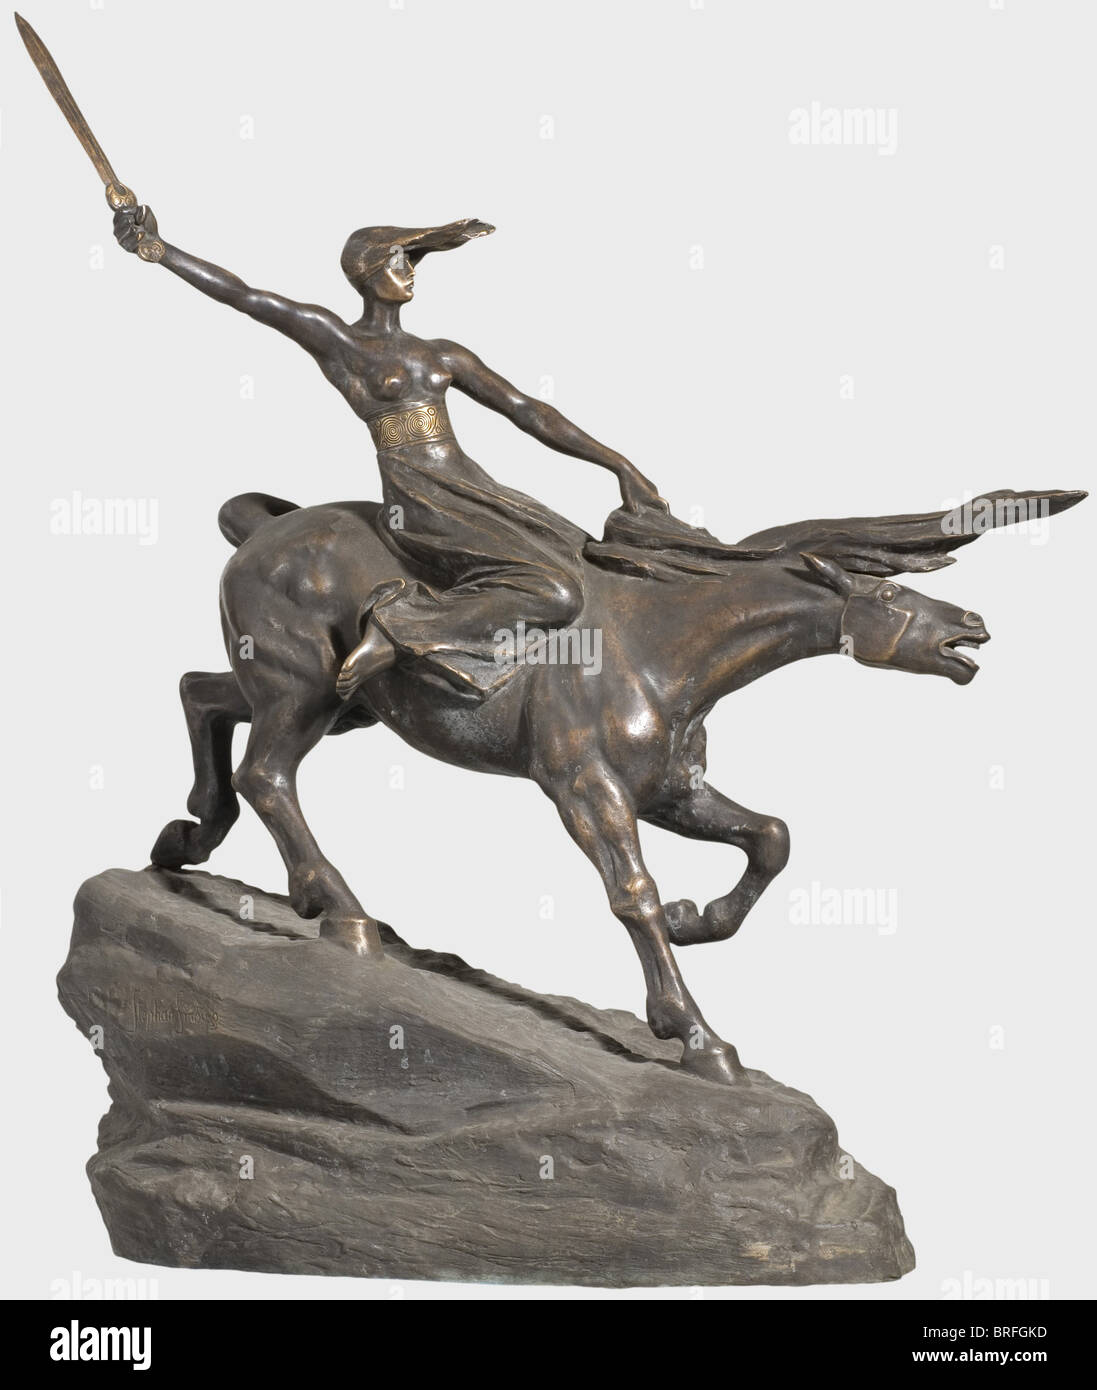 Stephan Sinding (1846 - 1922) - Valkyrie., Patinated bronze sculpture. Base with artist's signature 'Stephan Sinding'. Ca. 1901. 82.5 x 56 cm. Expressive portrayal of a valkyrie. In contrast to the well-known bronze statue of a valkyrie, which Sinding created in 1908 and which is located today in Copenhagen's Churchill Park, this female figure is holding a sword in her right hand instead of a spear. This alteration suggests that this work stems from an earlier phase. Stephan Sinding began drawing valkyries in 1872, in 1901 he created a first wood, Additional-Rights-Clearance-Info-Not-Available Stock Photo